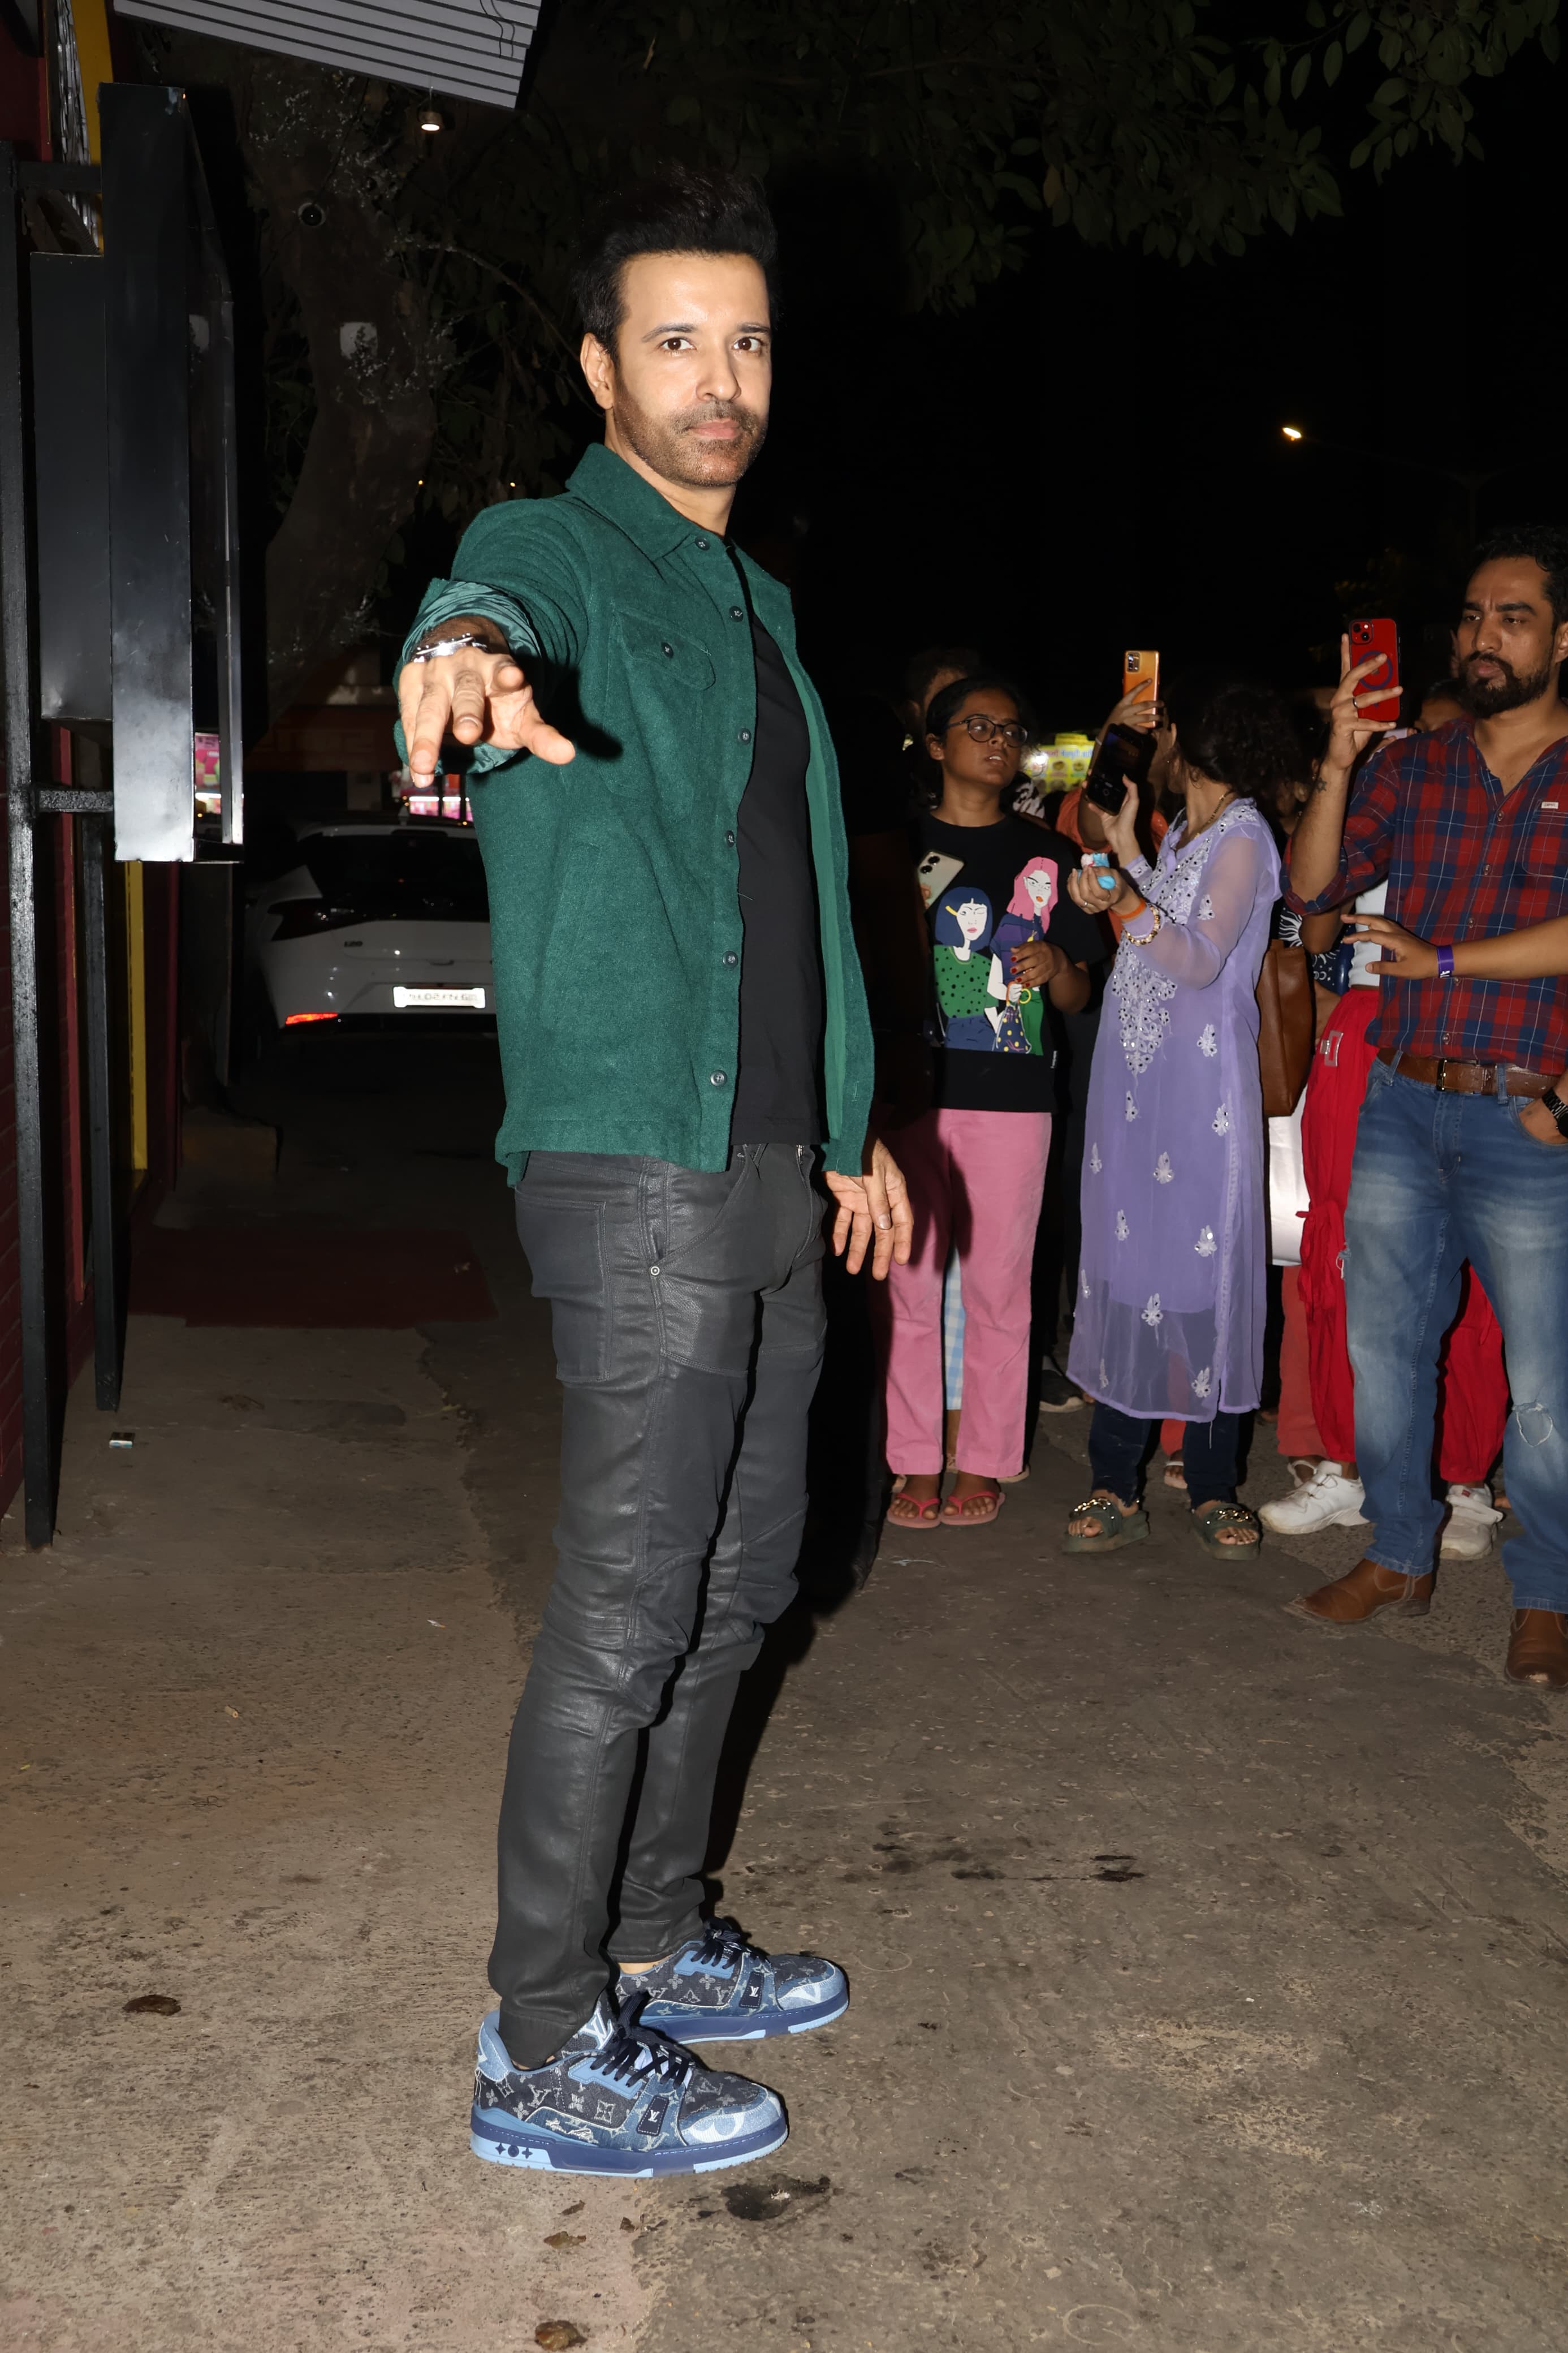 Aamir Ali, who is a close friend of Rupali Ganguly, attended the star-studded birthday bash of Anupamaa actress